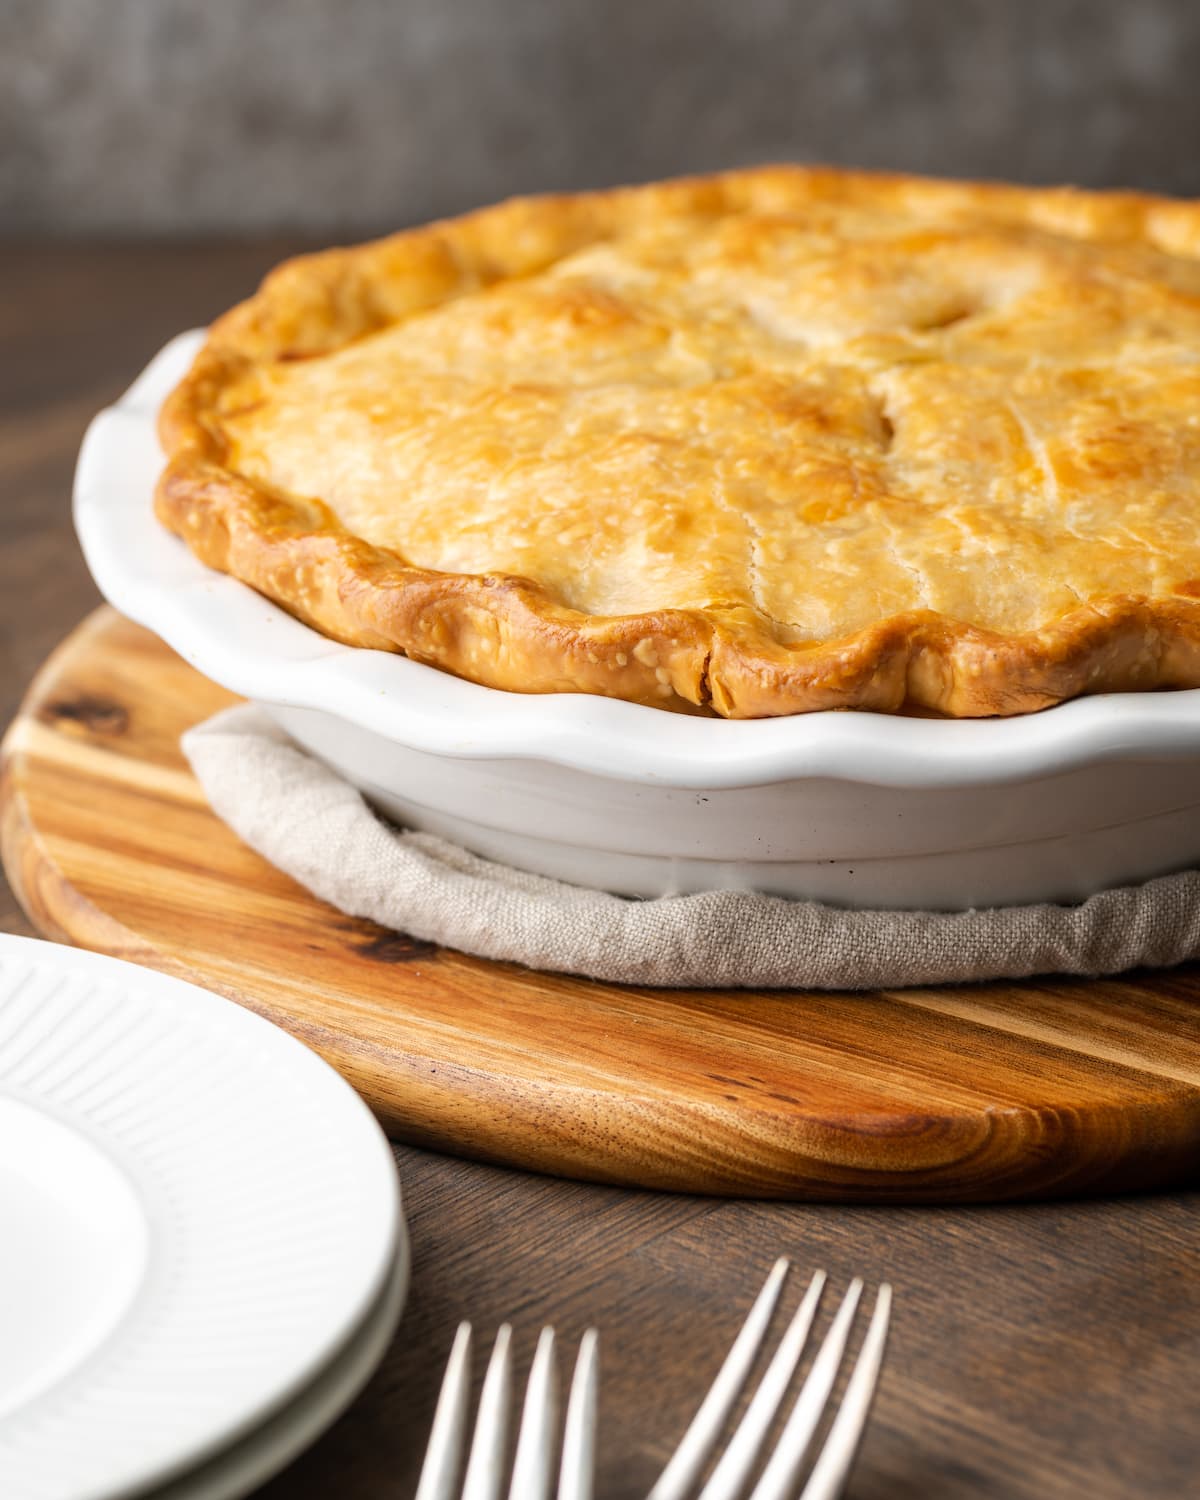 Baked chicken pot pie inside a pie plate next to stacked white plates and two forks.